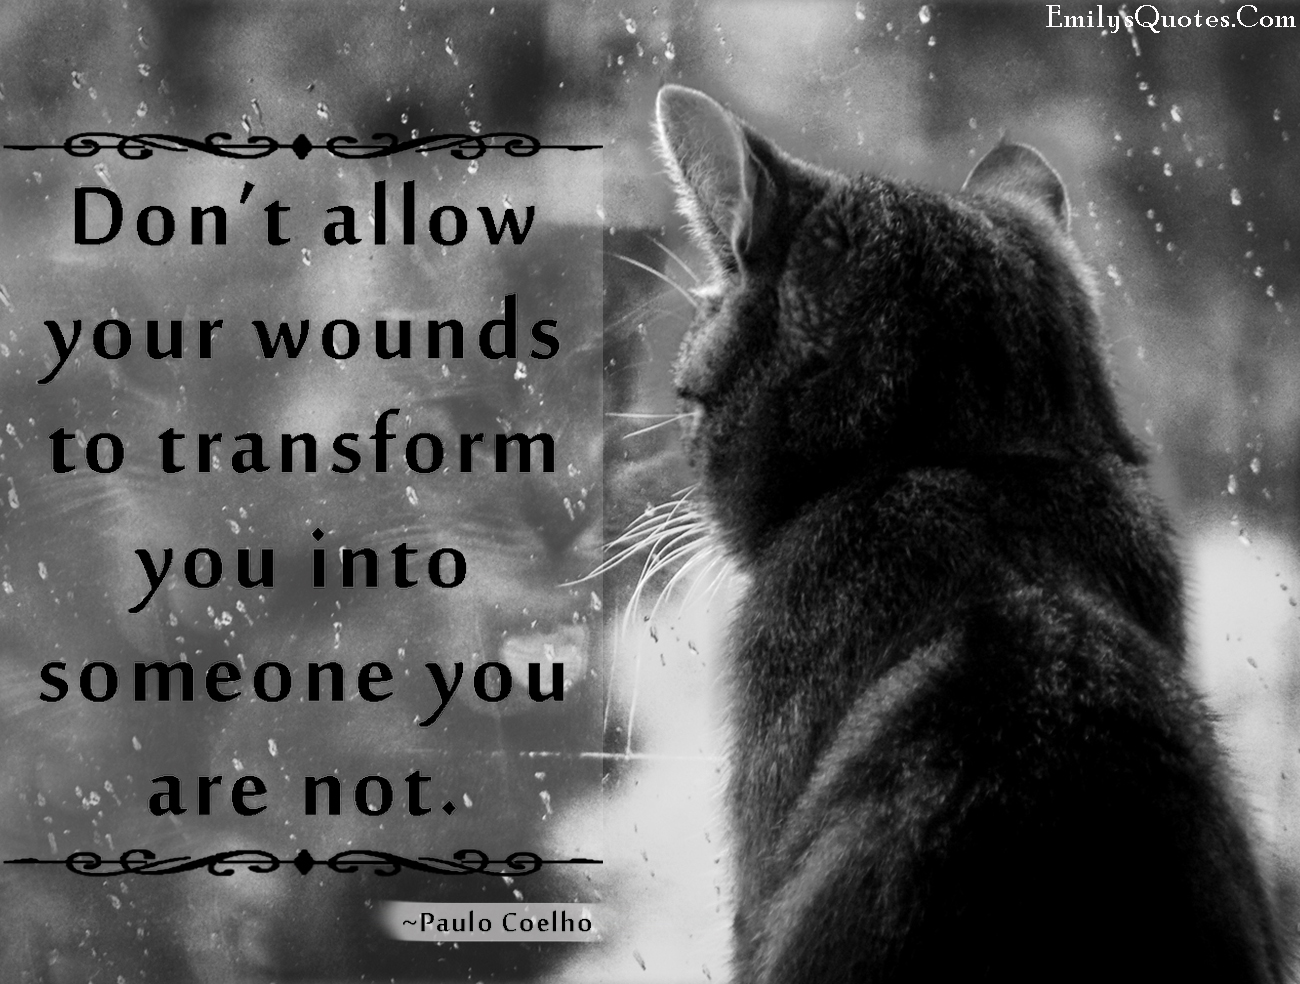 Don’t allow your wounds to transform you into someone you are not